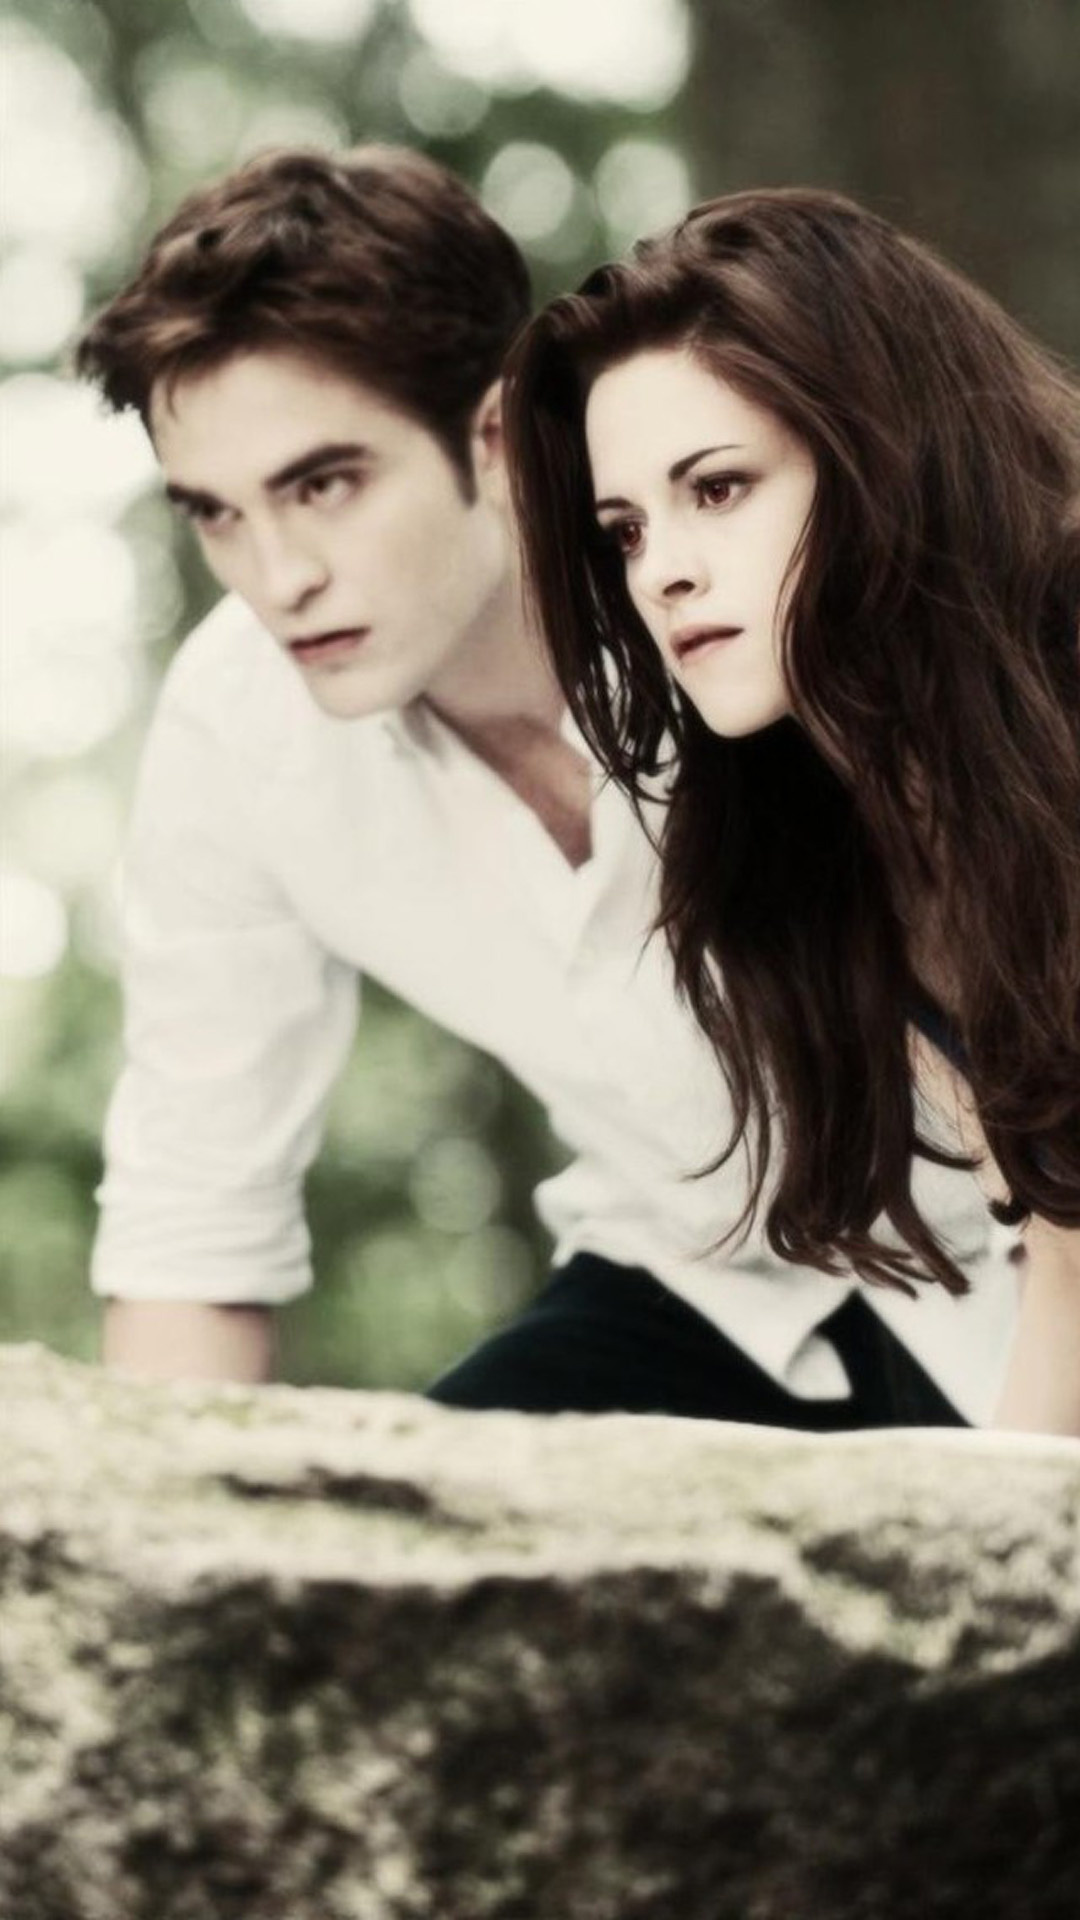 Twilight saga, Pictures wallpapers, Series poster, Vampire love story, 1080x1920 Full HD Handy